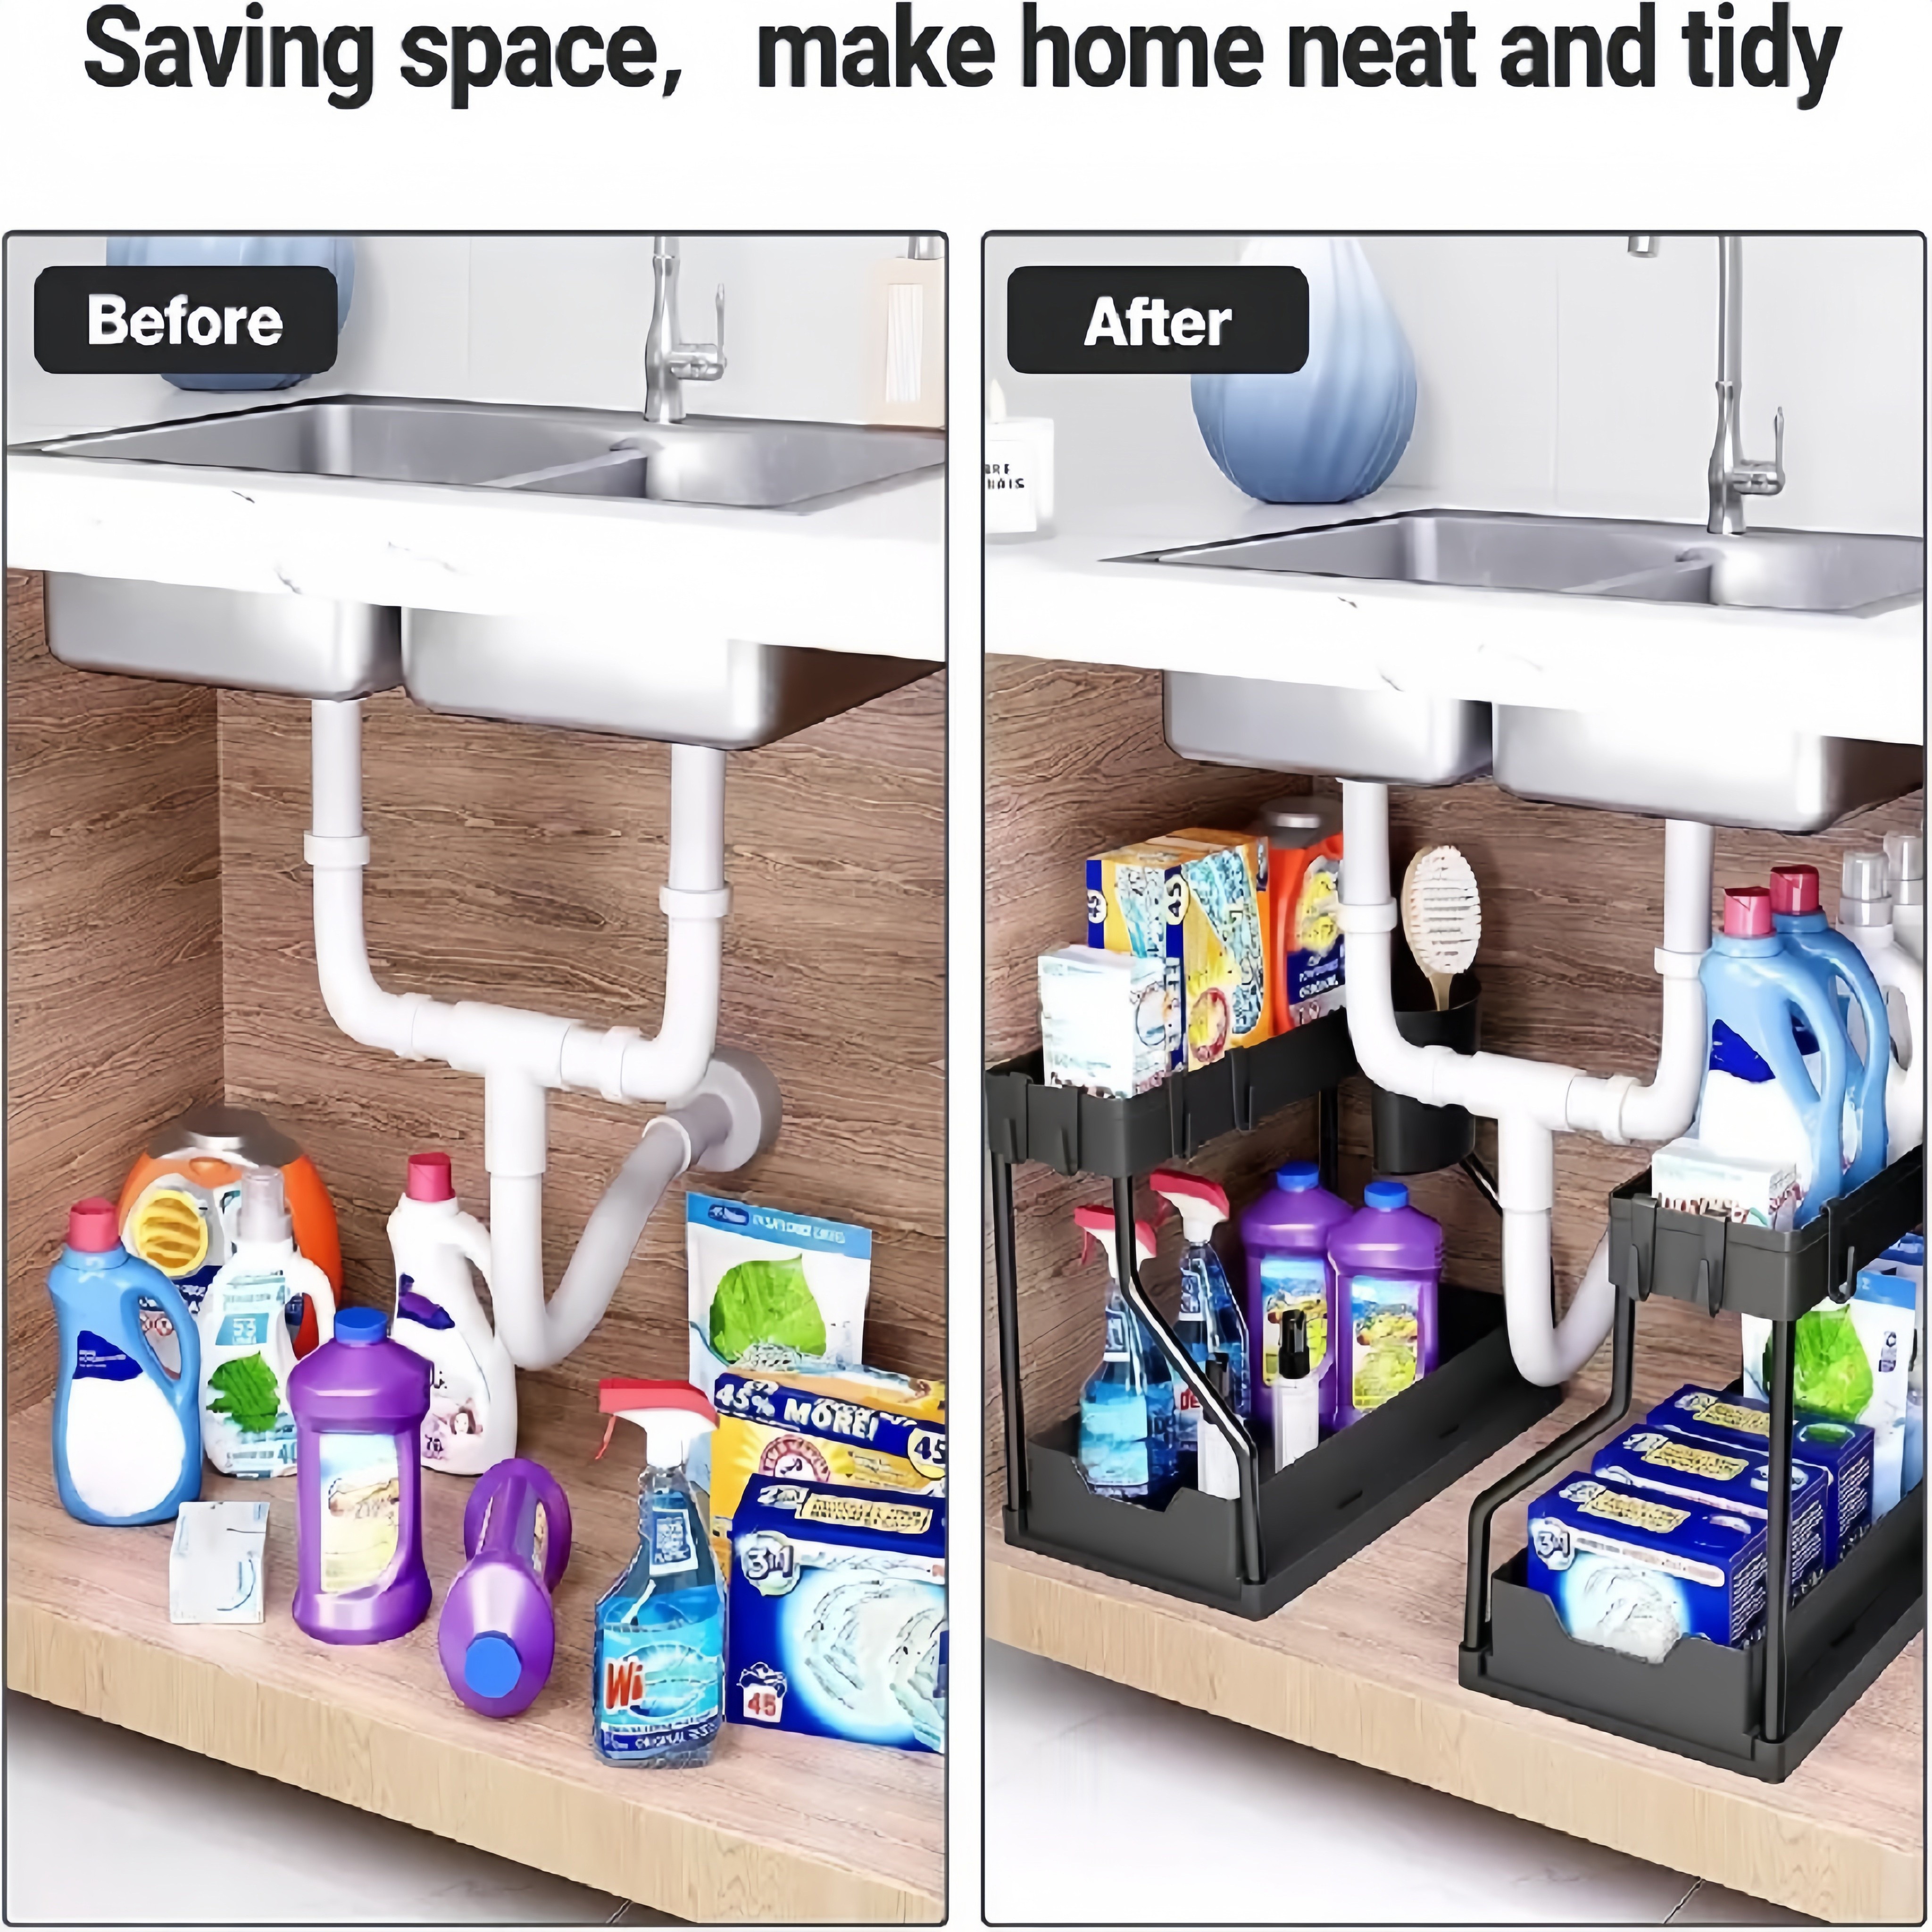 Making the Most of Storage Space Under the Sink